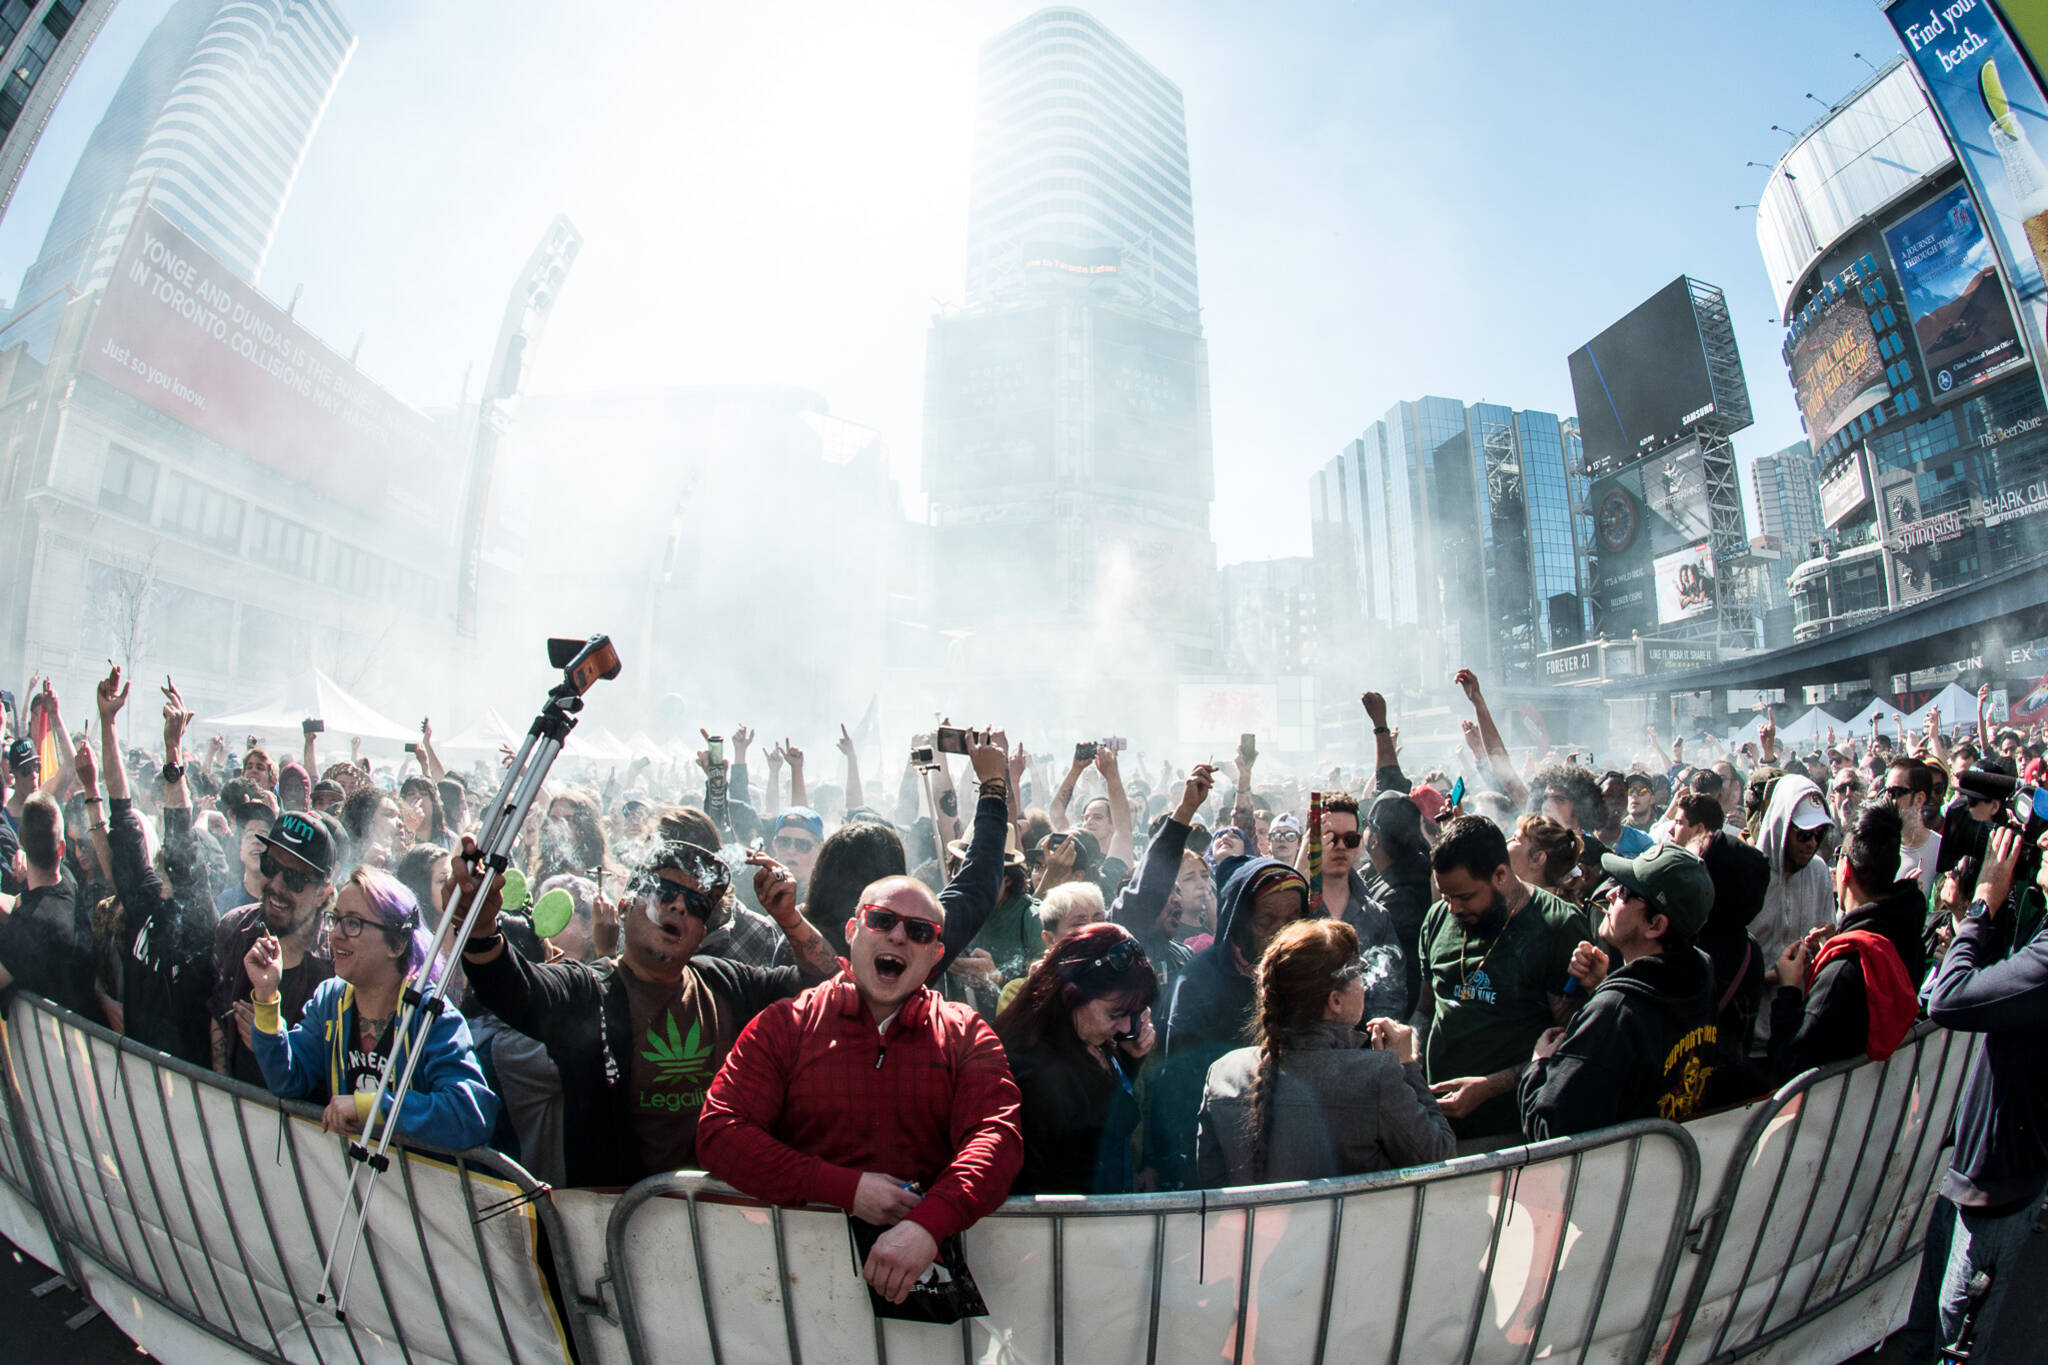 10 events to check out on 420 in Toronto this year